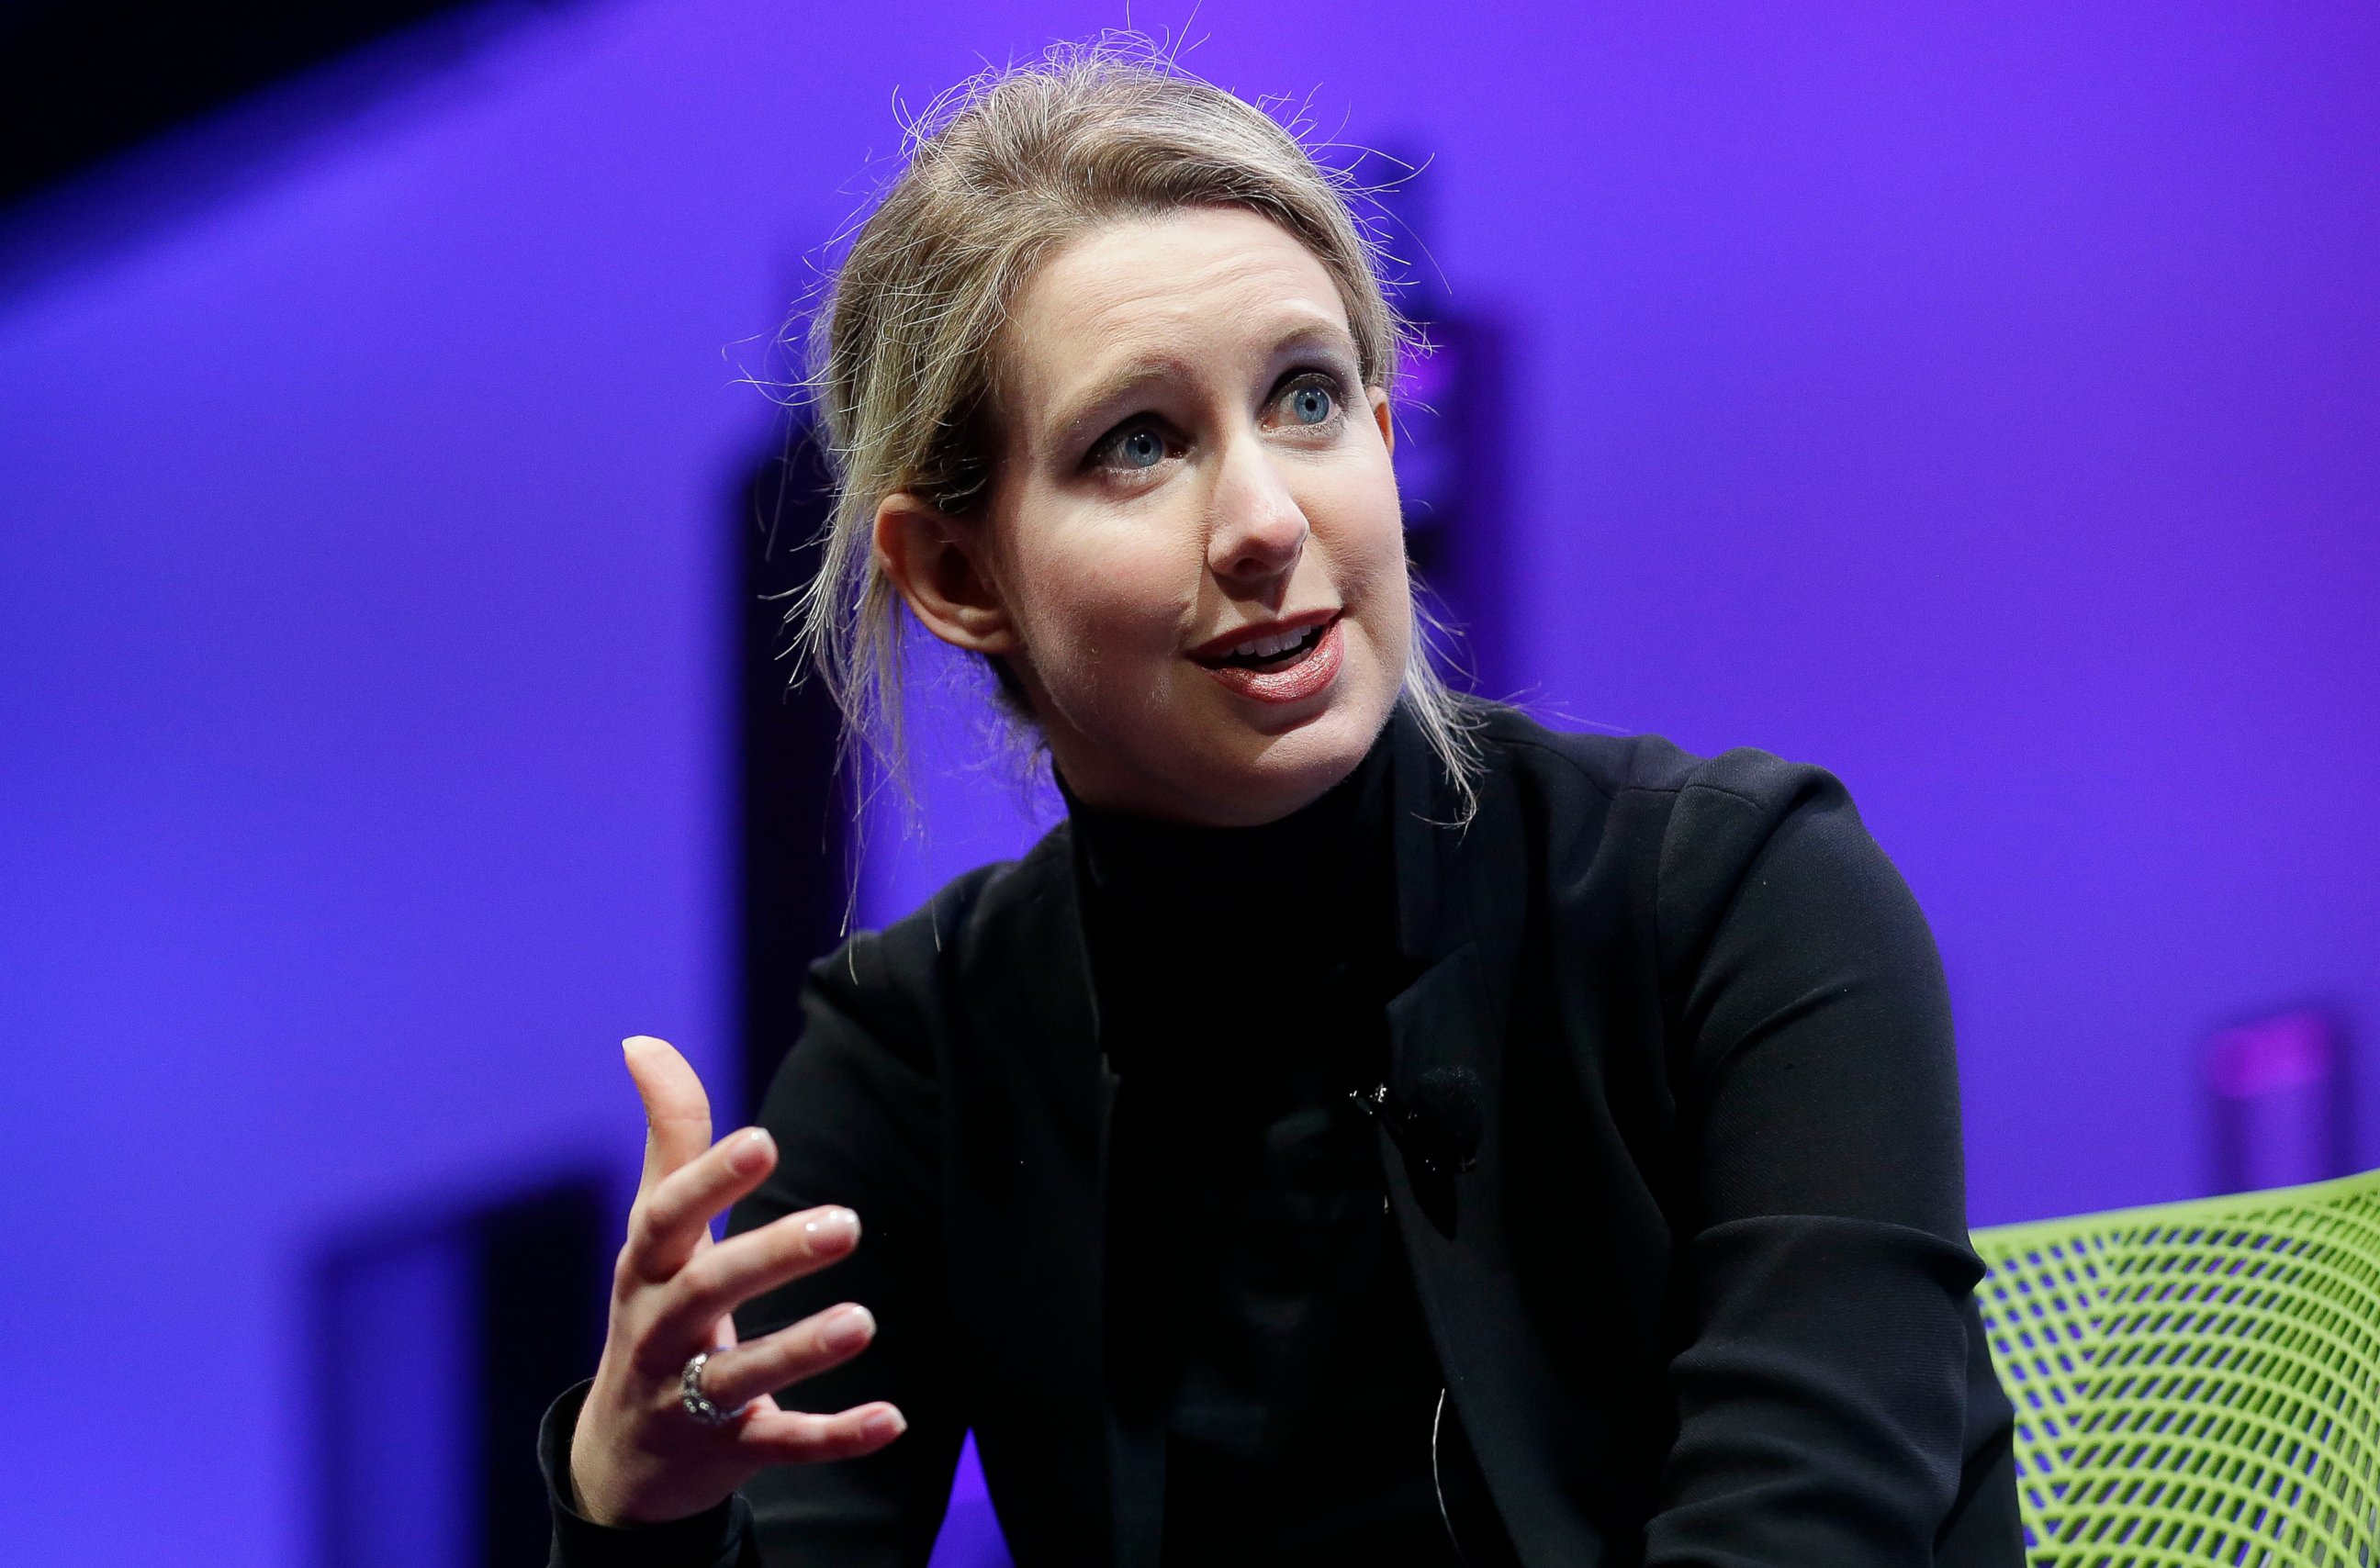 PHOTO: In this Nov. 2, 2015 file photo, Elizabeth Holmes, founder and CEO of Theranos, speaks at the Fortune Global Forum in San Francisco.